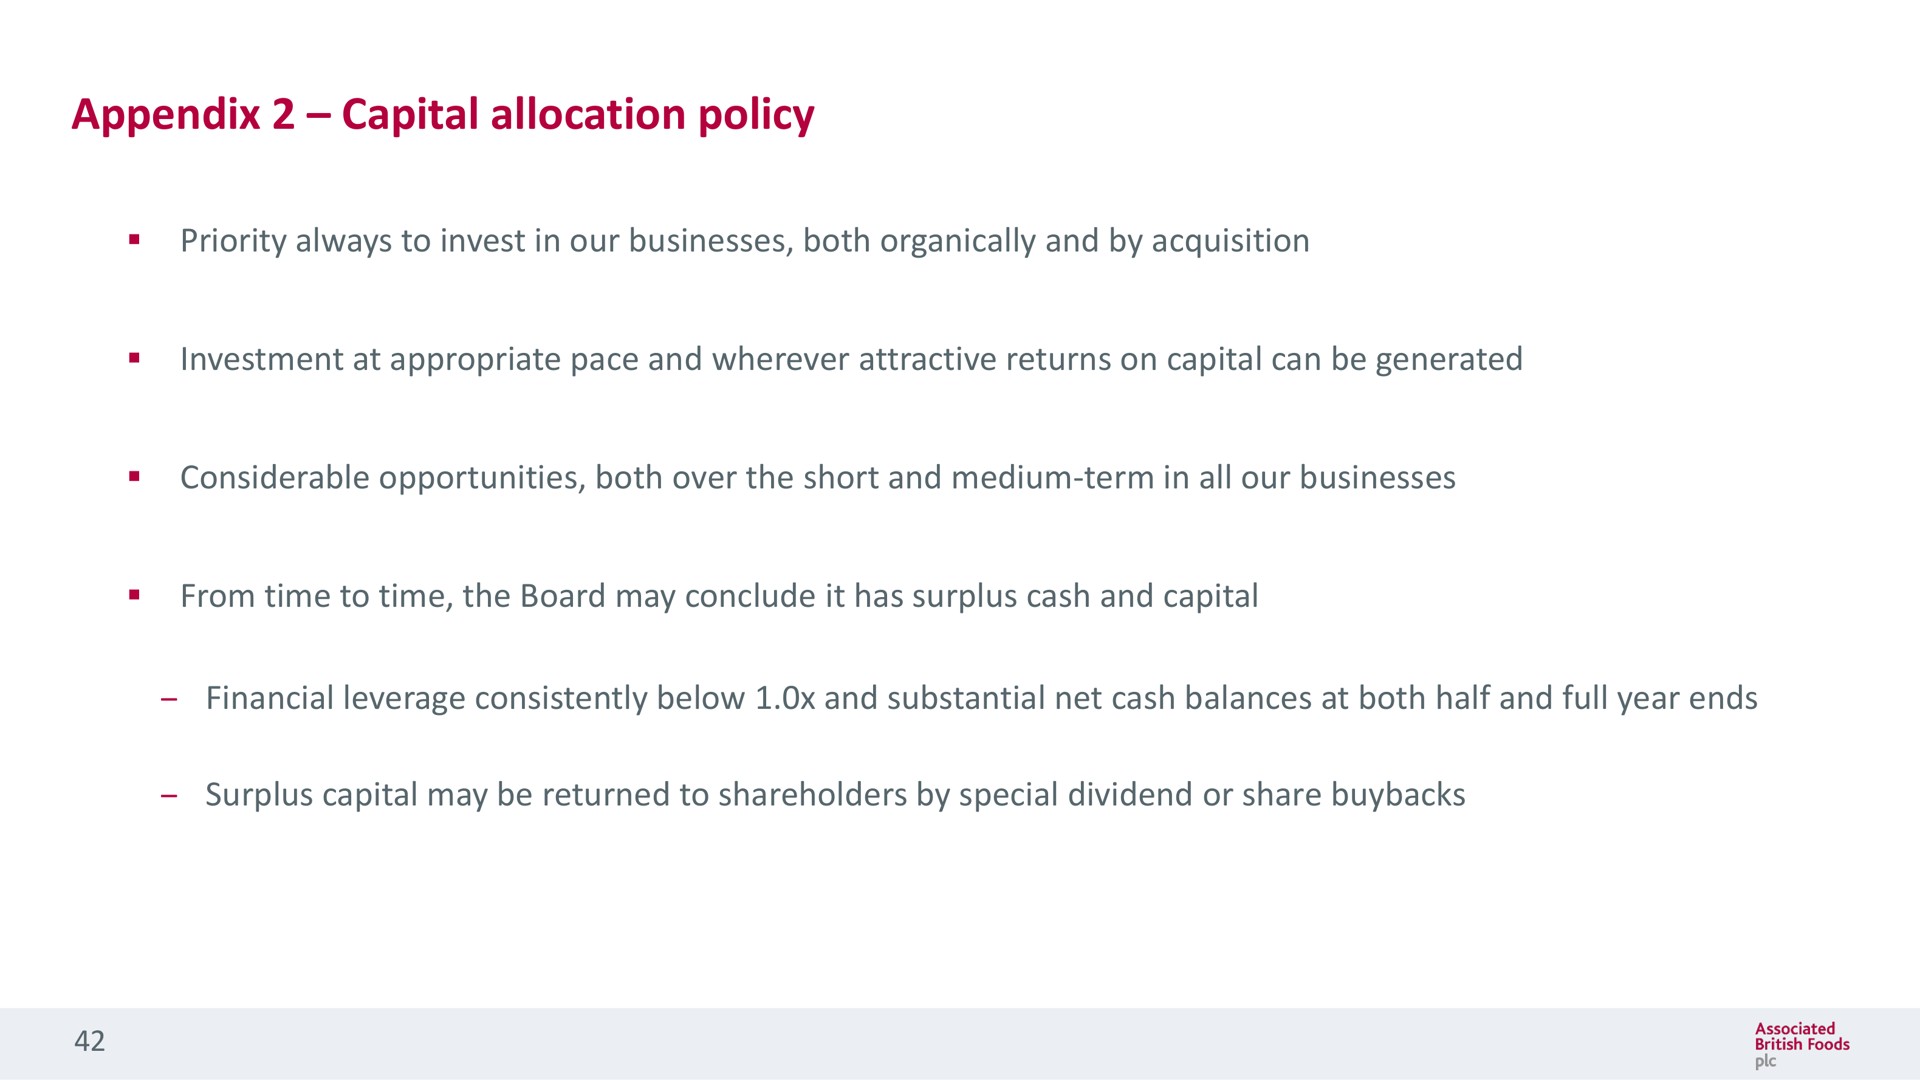 appendix capital allocation policy | Associated British Foods